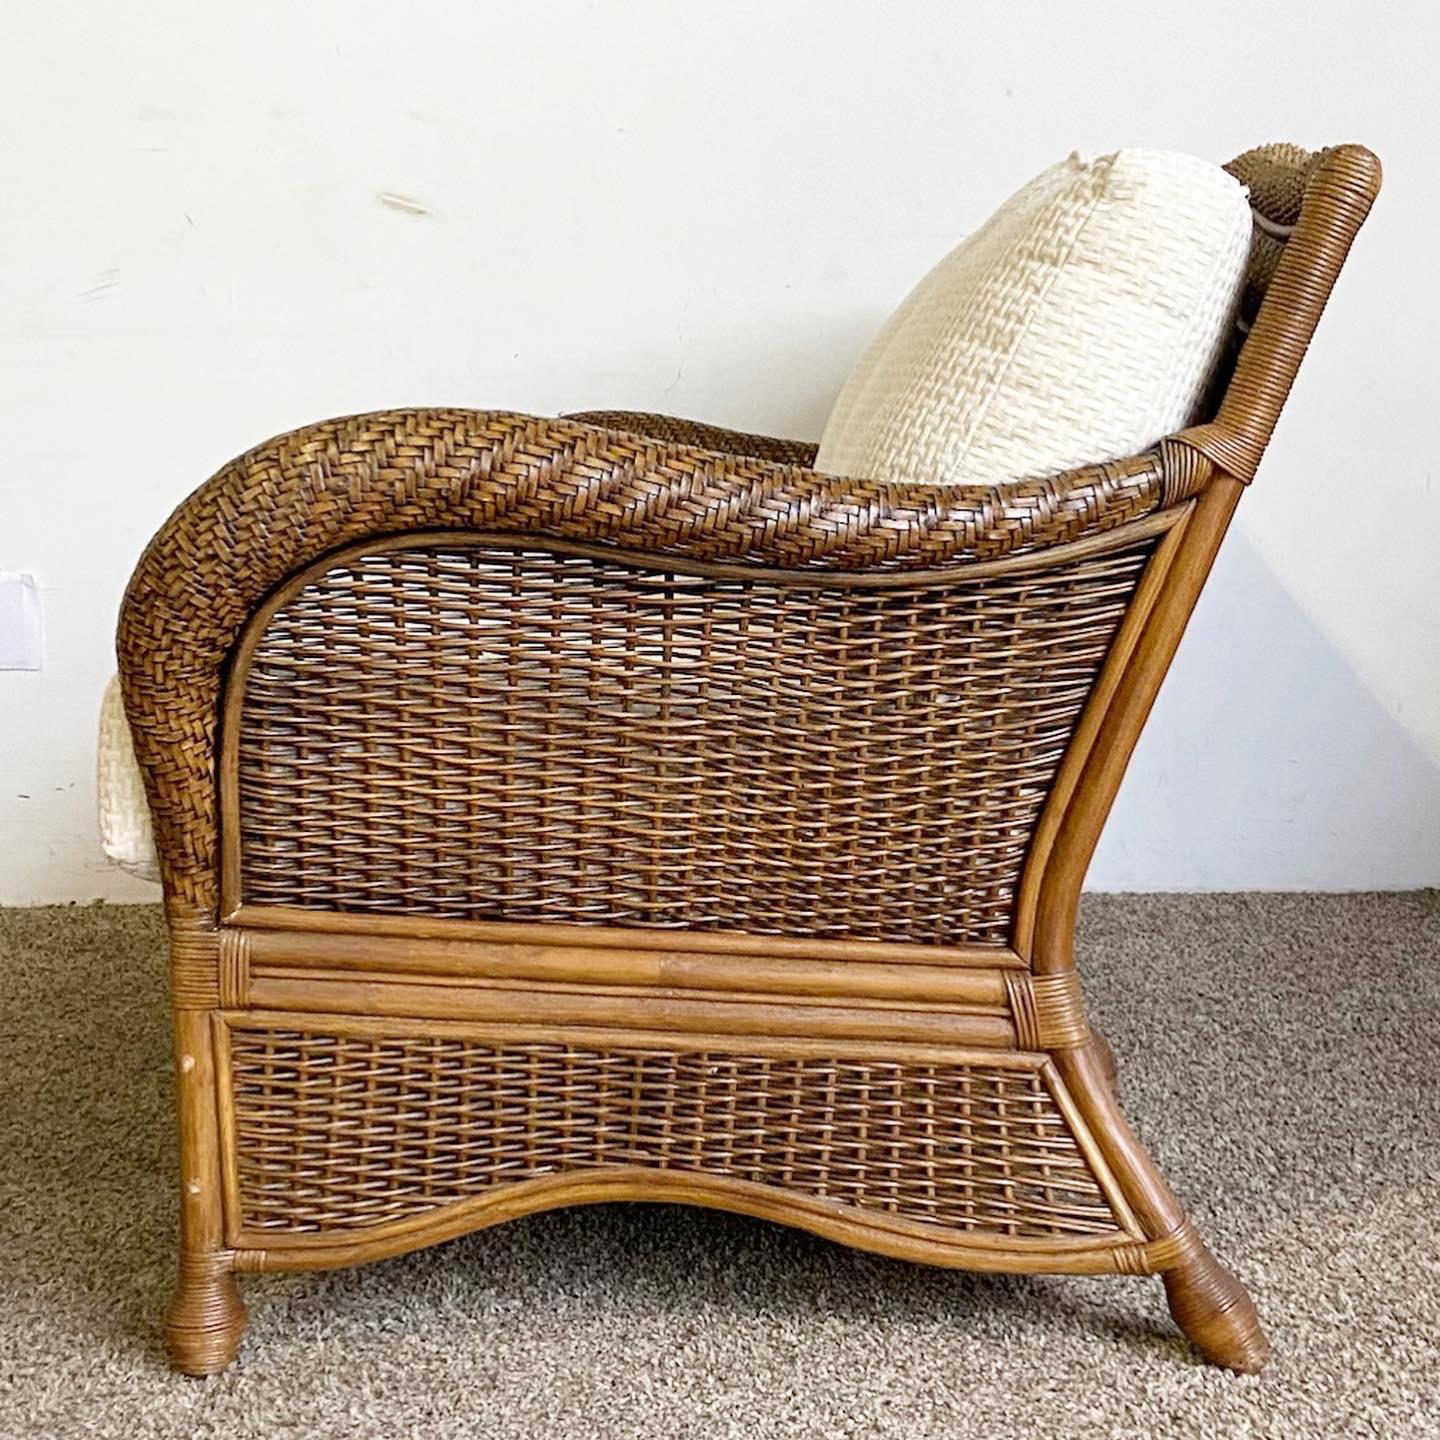 Indonesian Boho Chic Bamboo Rattan Wicker Love Seat With Cushions For Sale